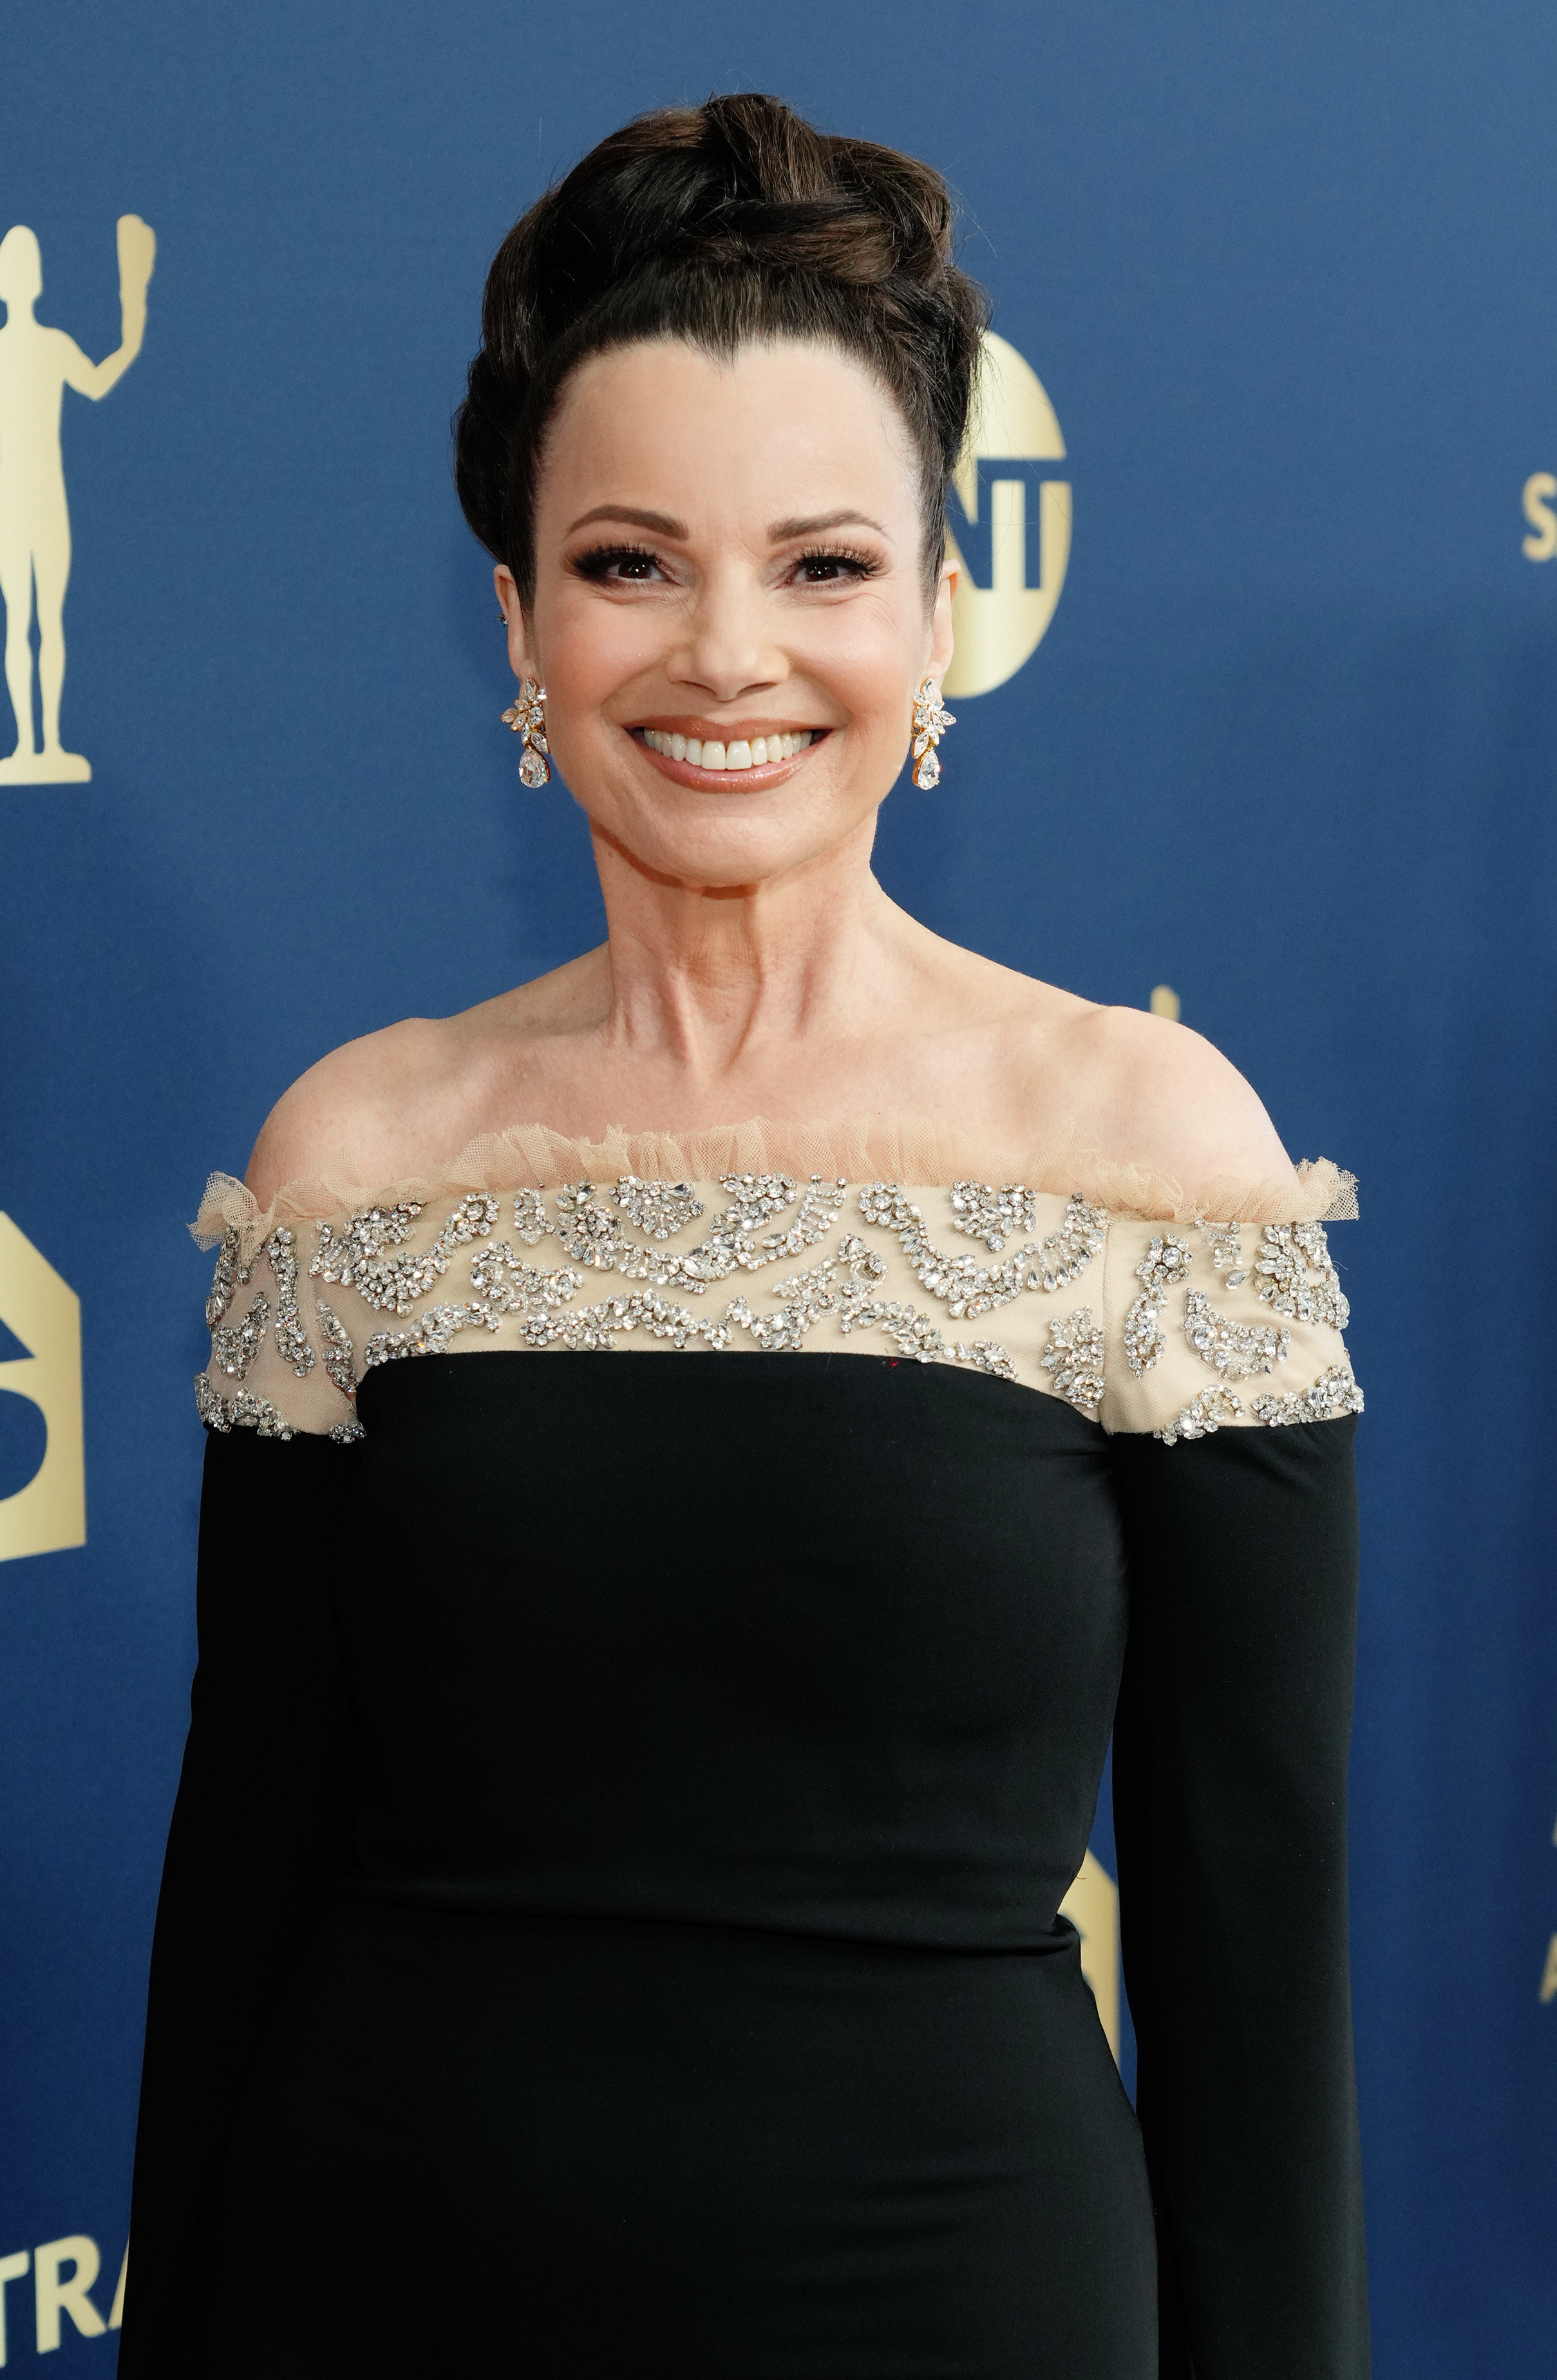 Fran Drescher smiles while on the red carpet wearing a black and cream off the shoulder dress